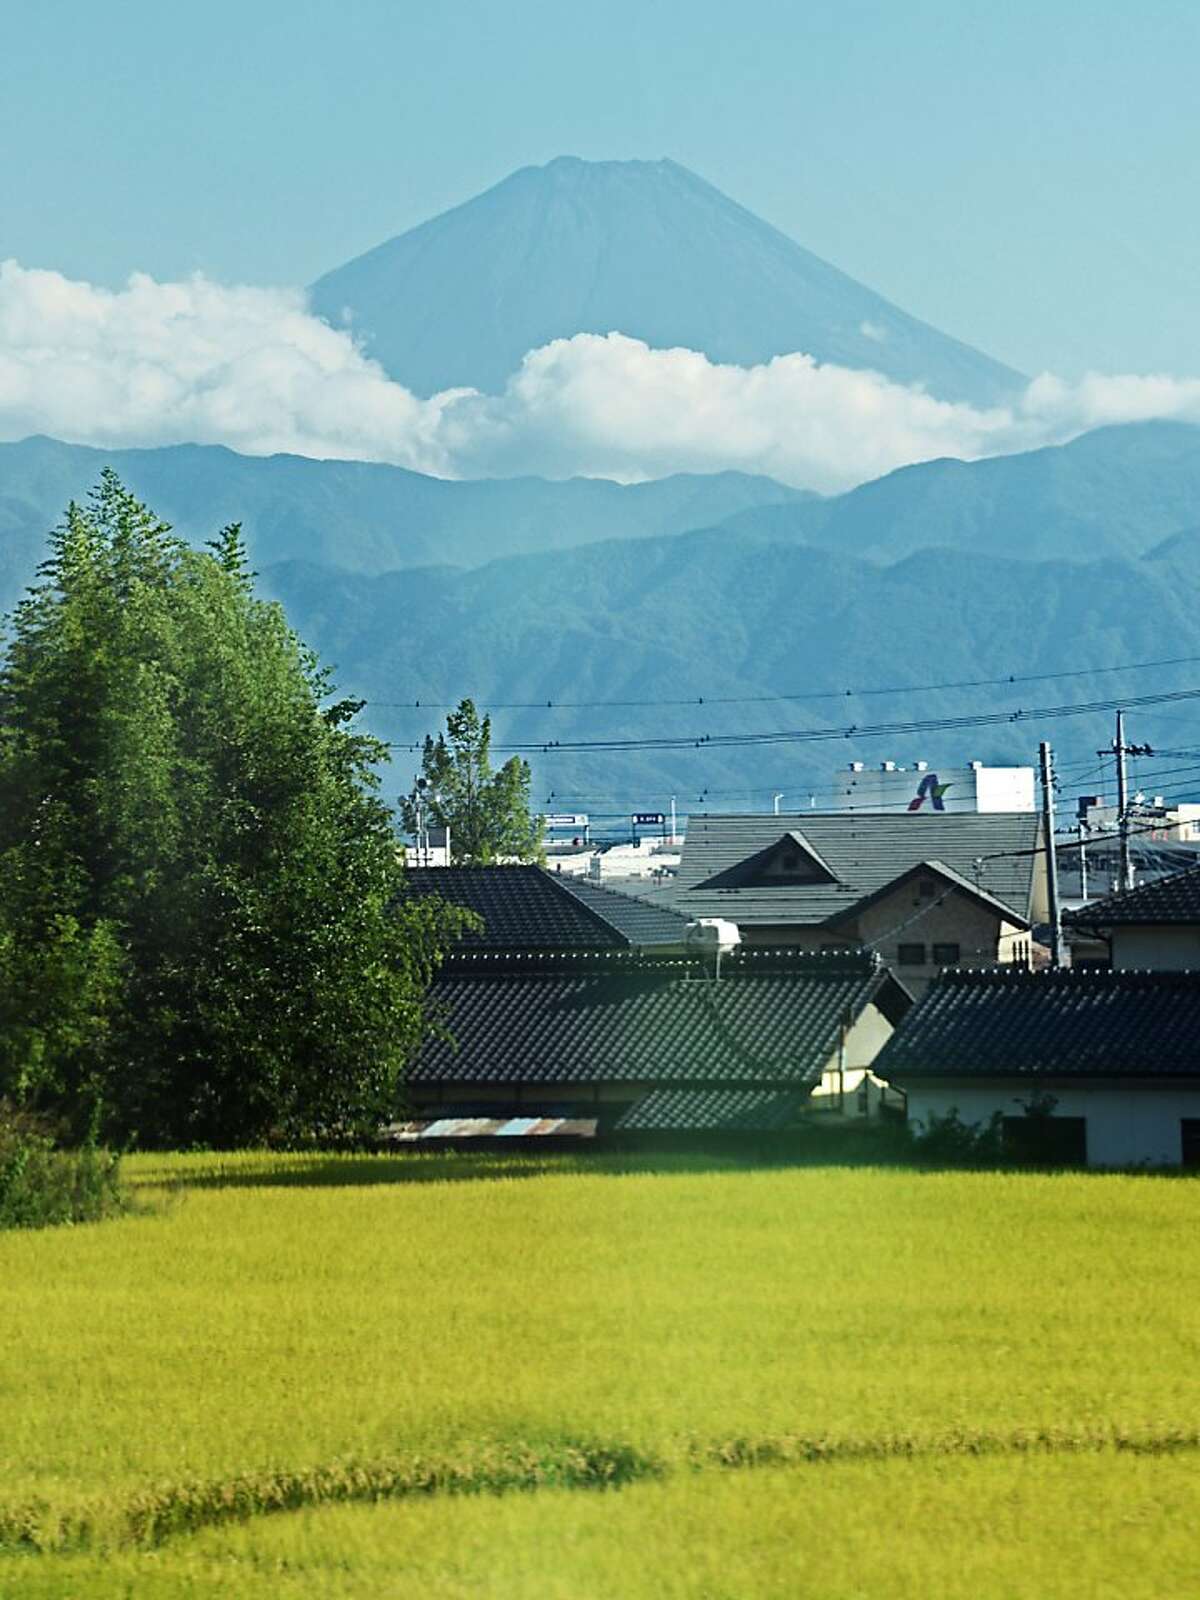 Riding a train through central Japan allows for spectacular views of Mt. Fuji and rice fields